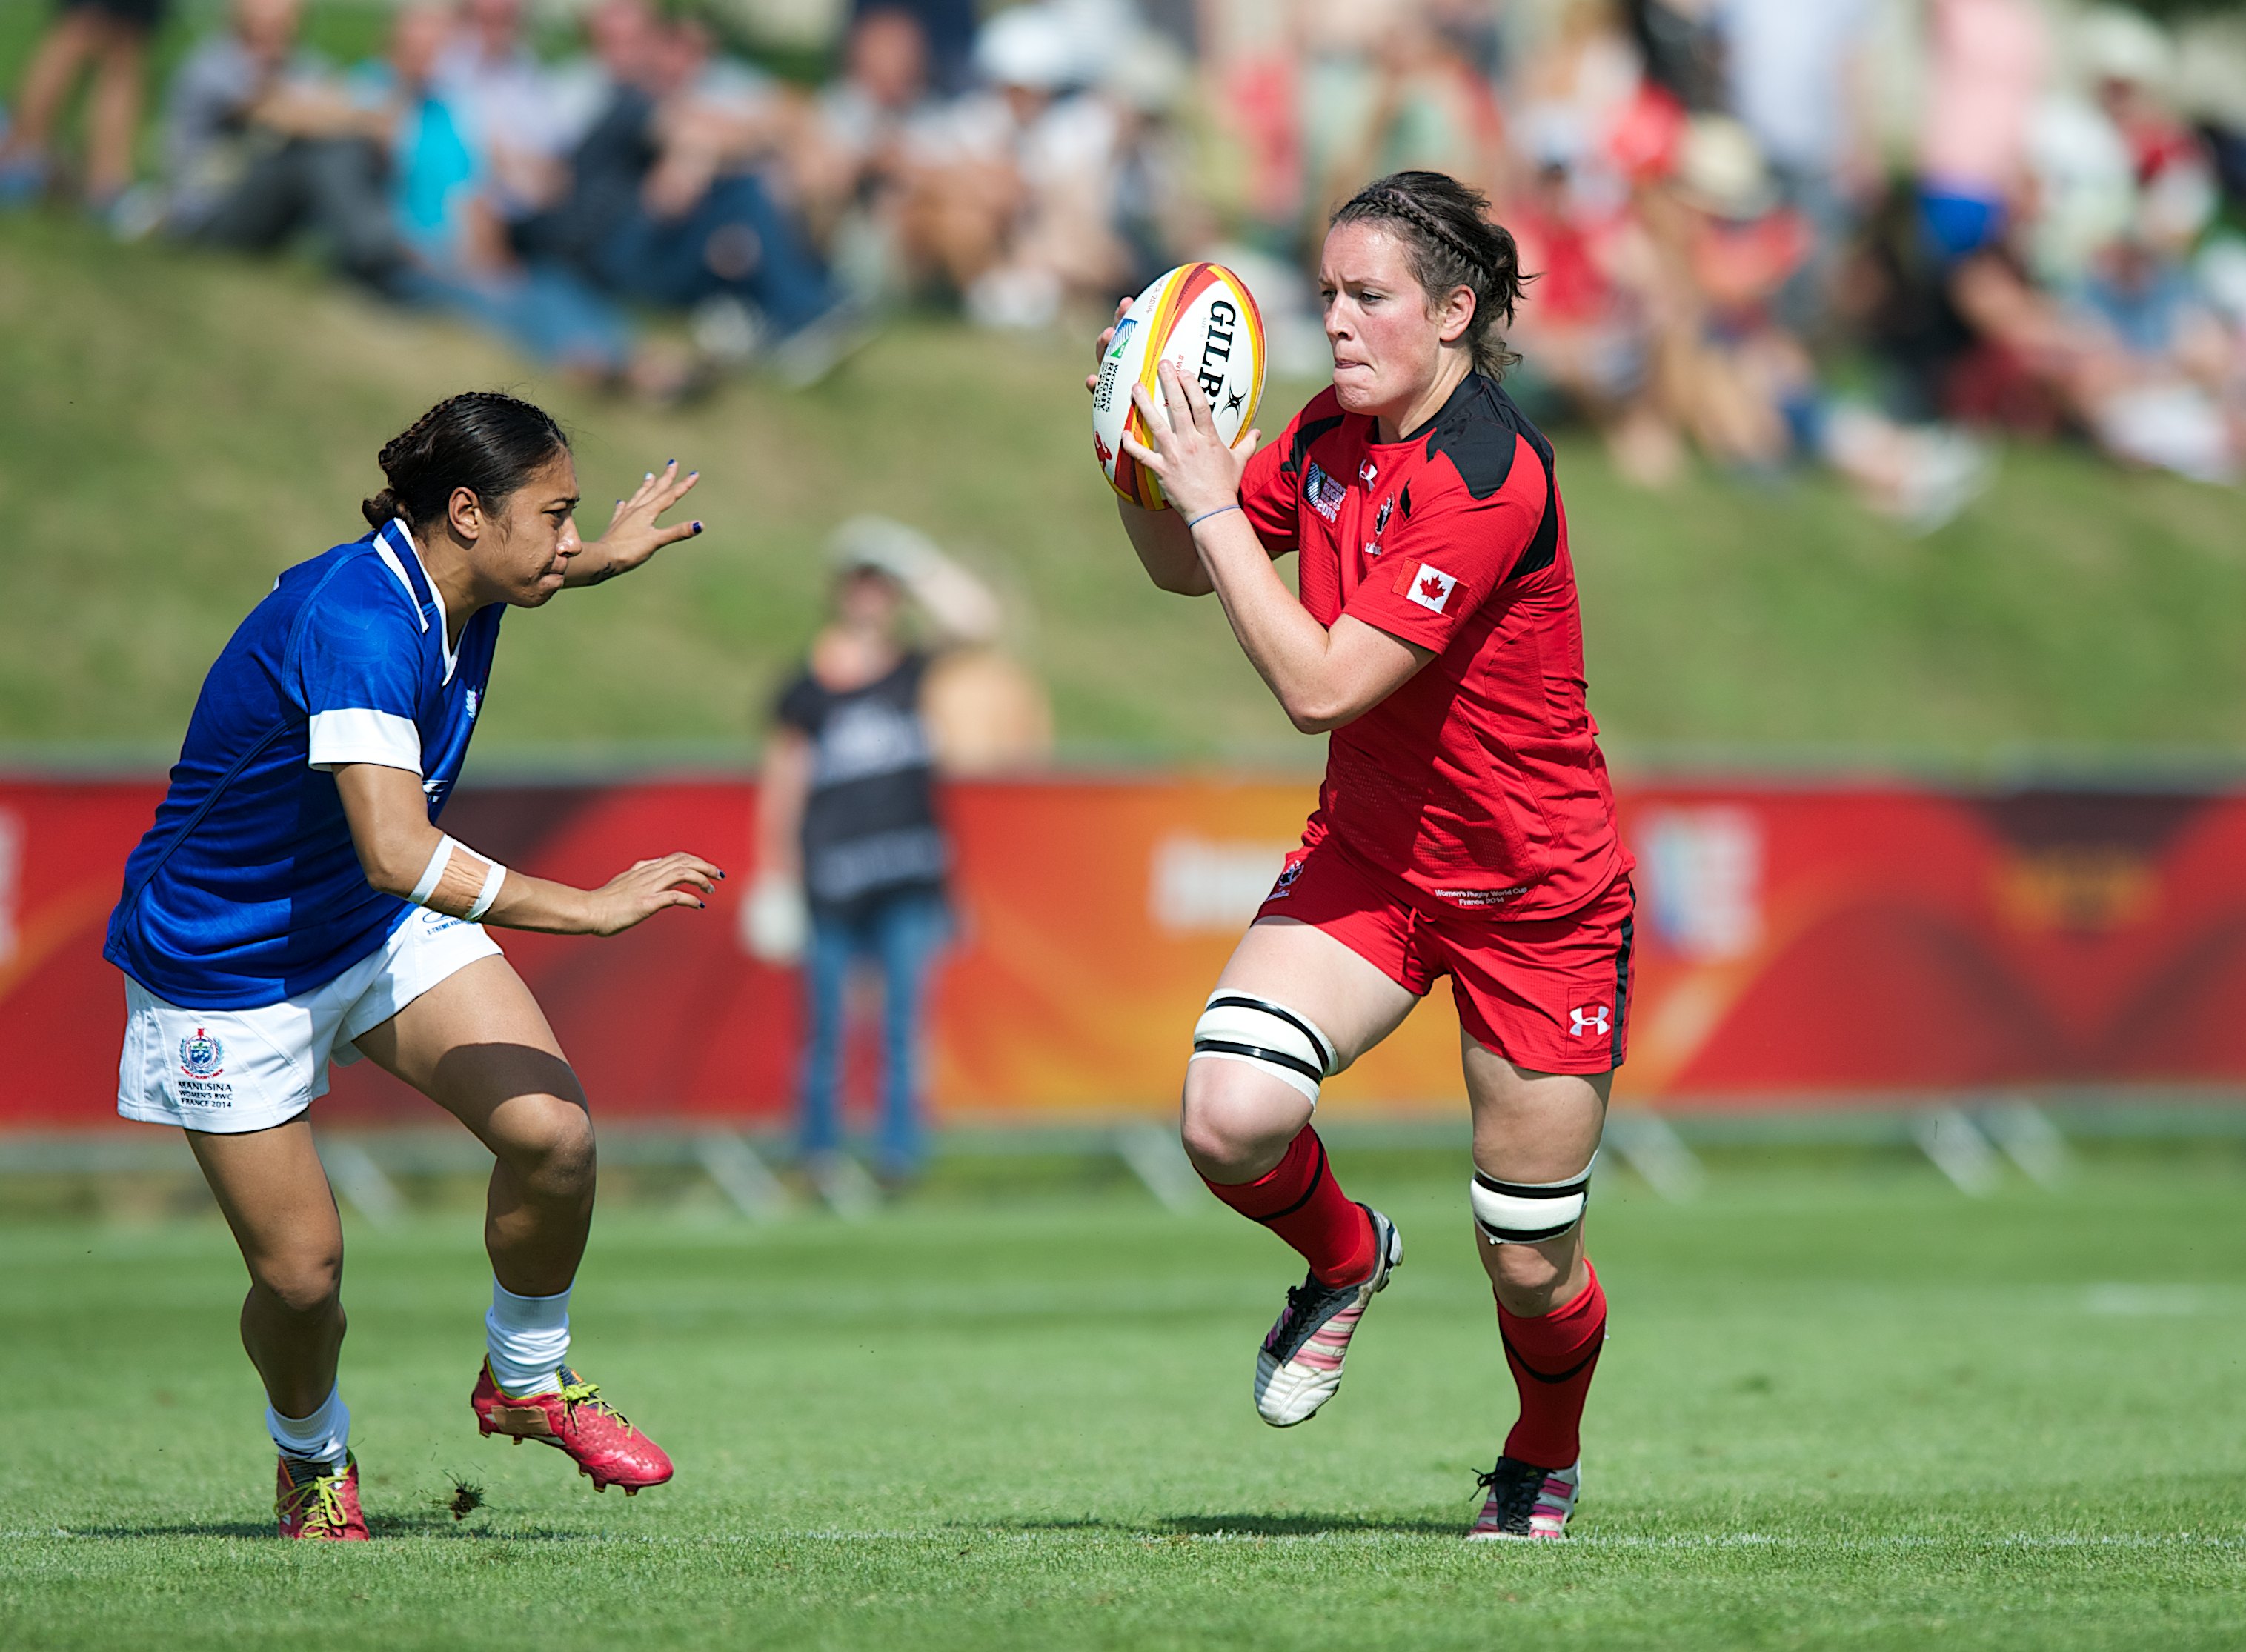 CANADIAN PRIDE – Jacey Murphy of the Canadian Women’s Rugby team competes during the Women’s Rugby World Cup in France. Murphy